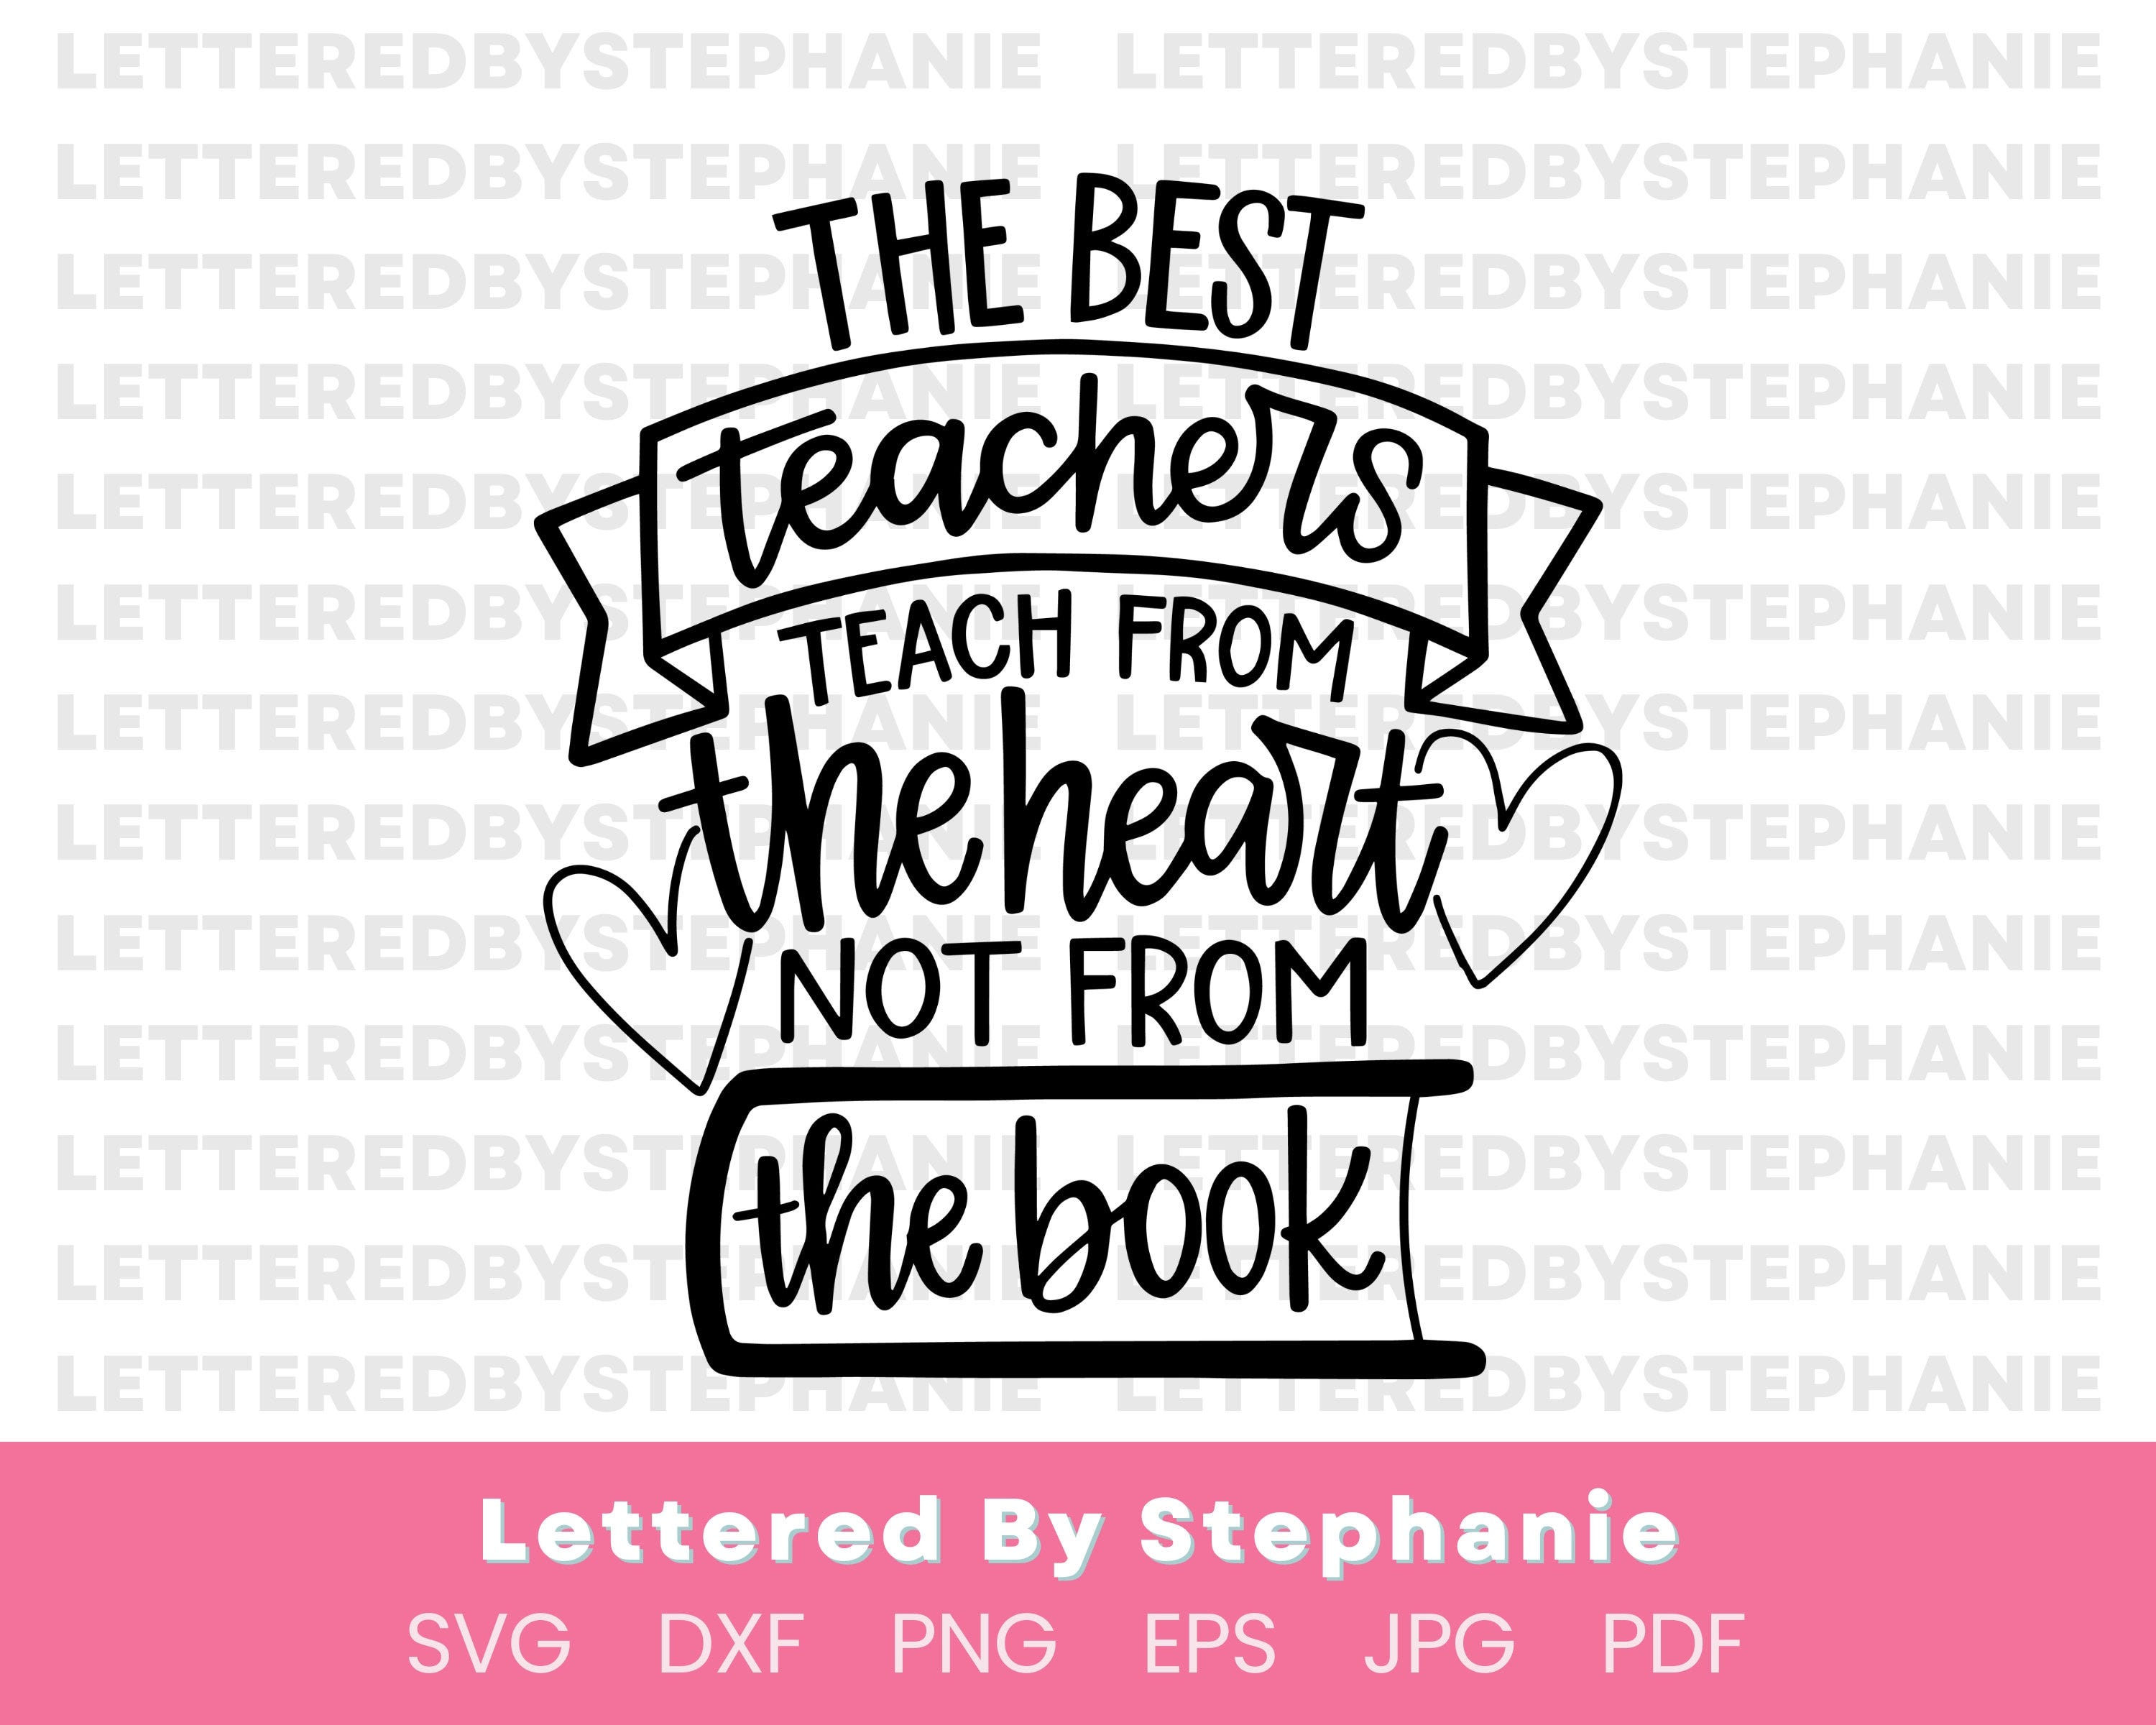 Uplifting teacher quote, The best teachers teach from the heart not from the book SVG cut file for cricut or silhouette machines